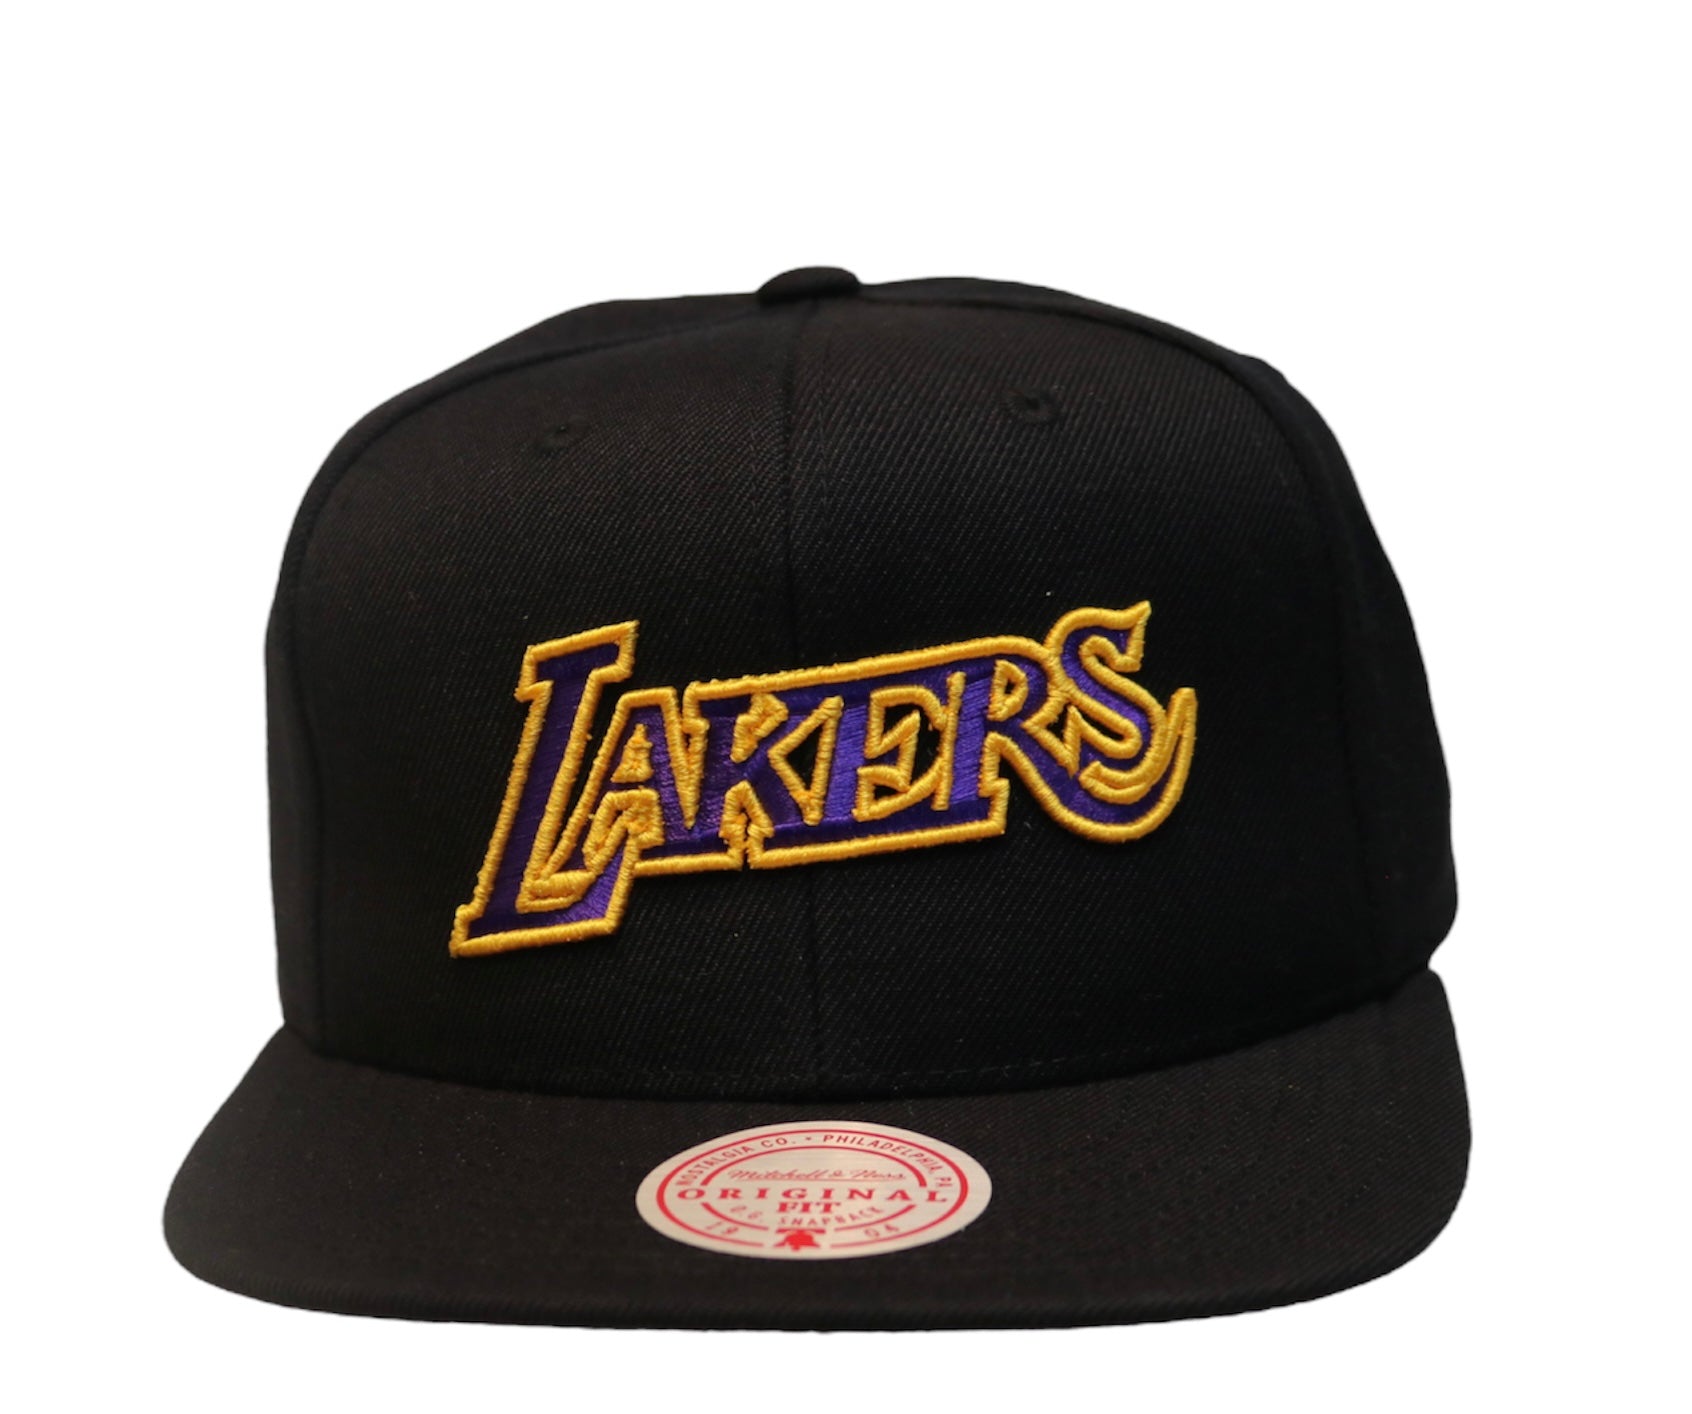 Los Angeles Lakers Hats, Jerseys, Lakers Clothing